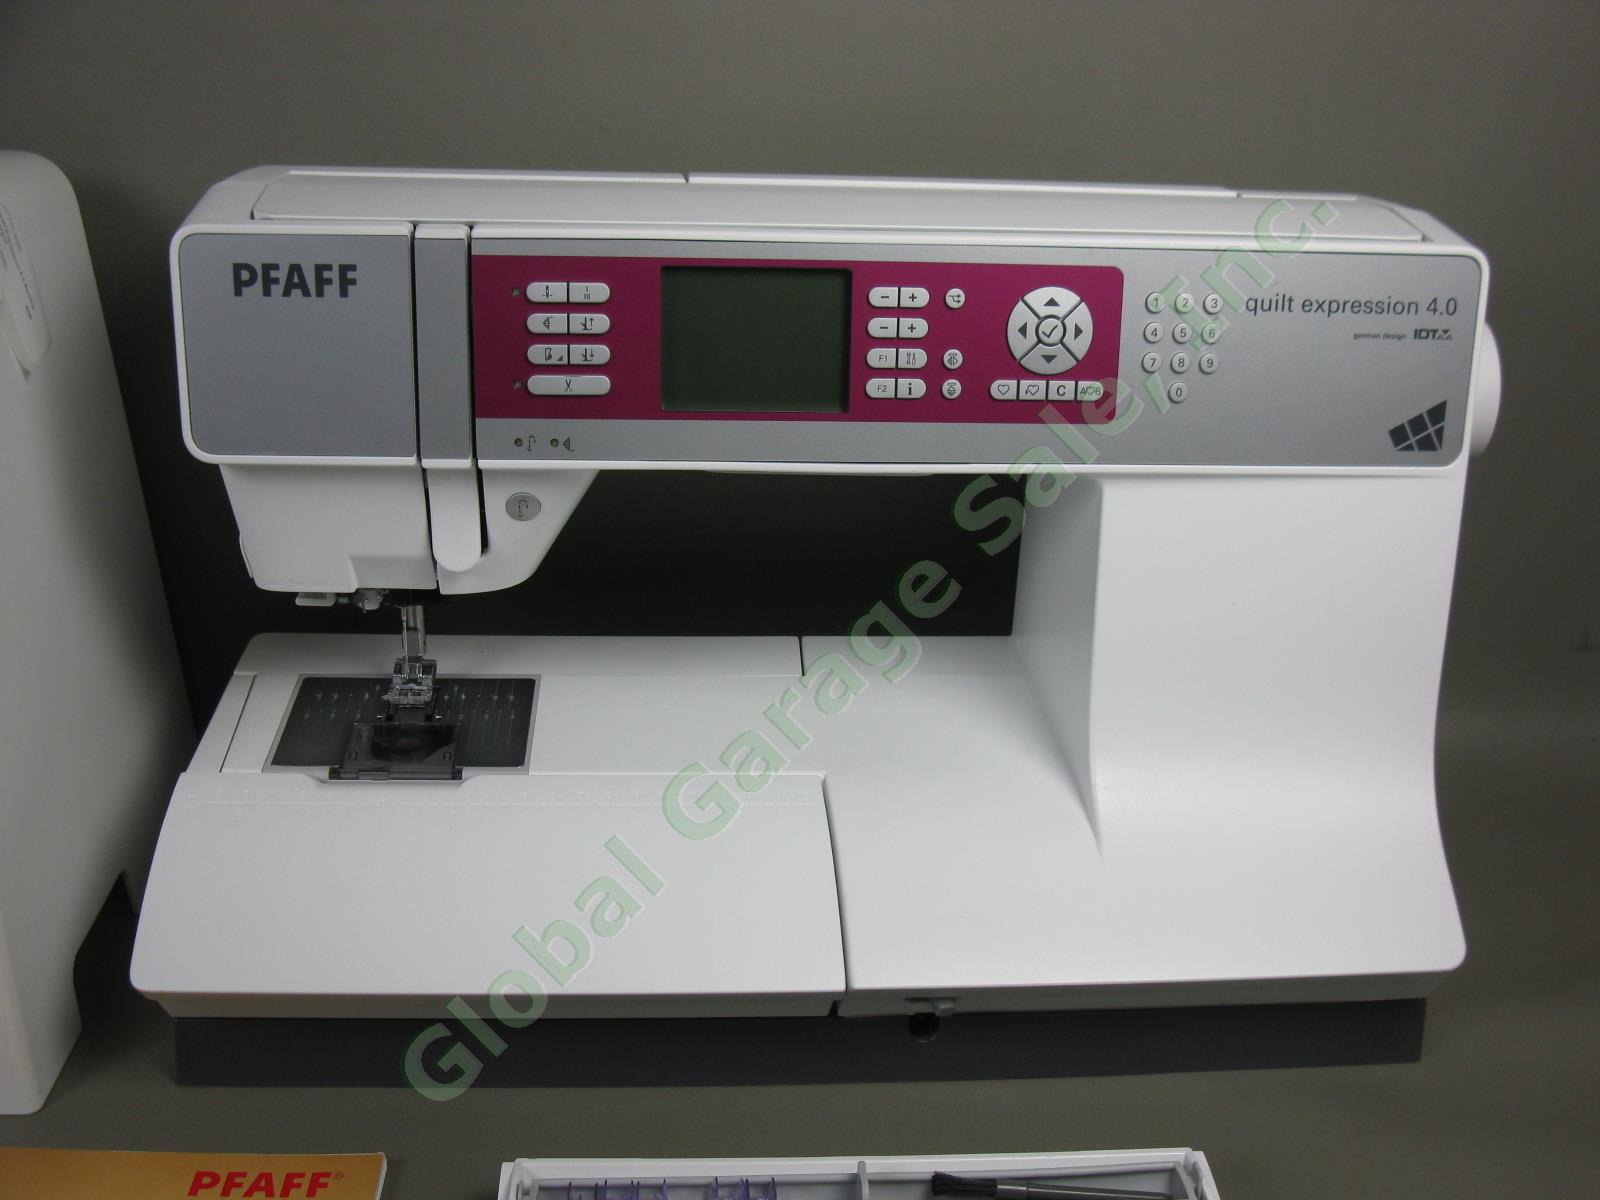 Pfaff Quilt Expression 4.0 Sewing Machine One Owner! Just Serviced! No Reserve! 1